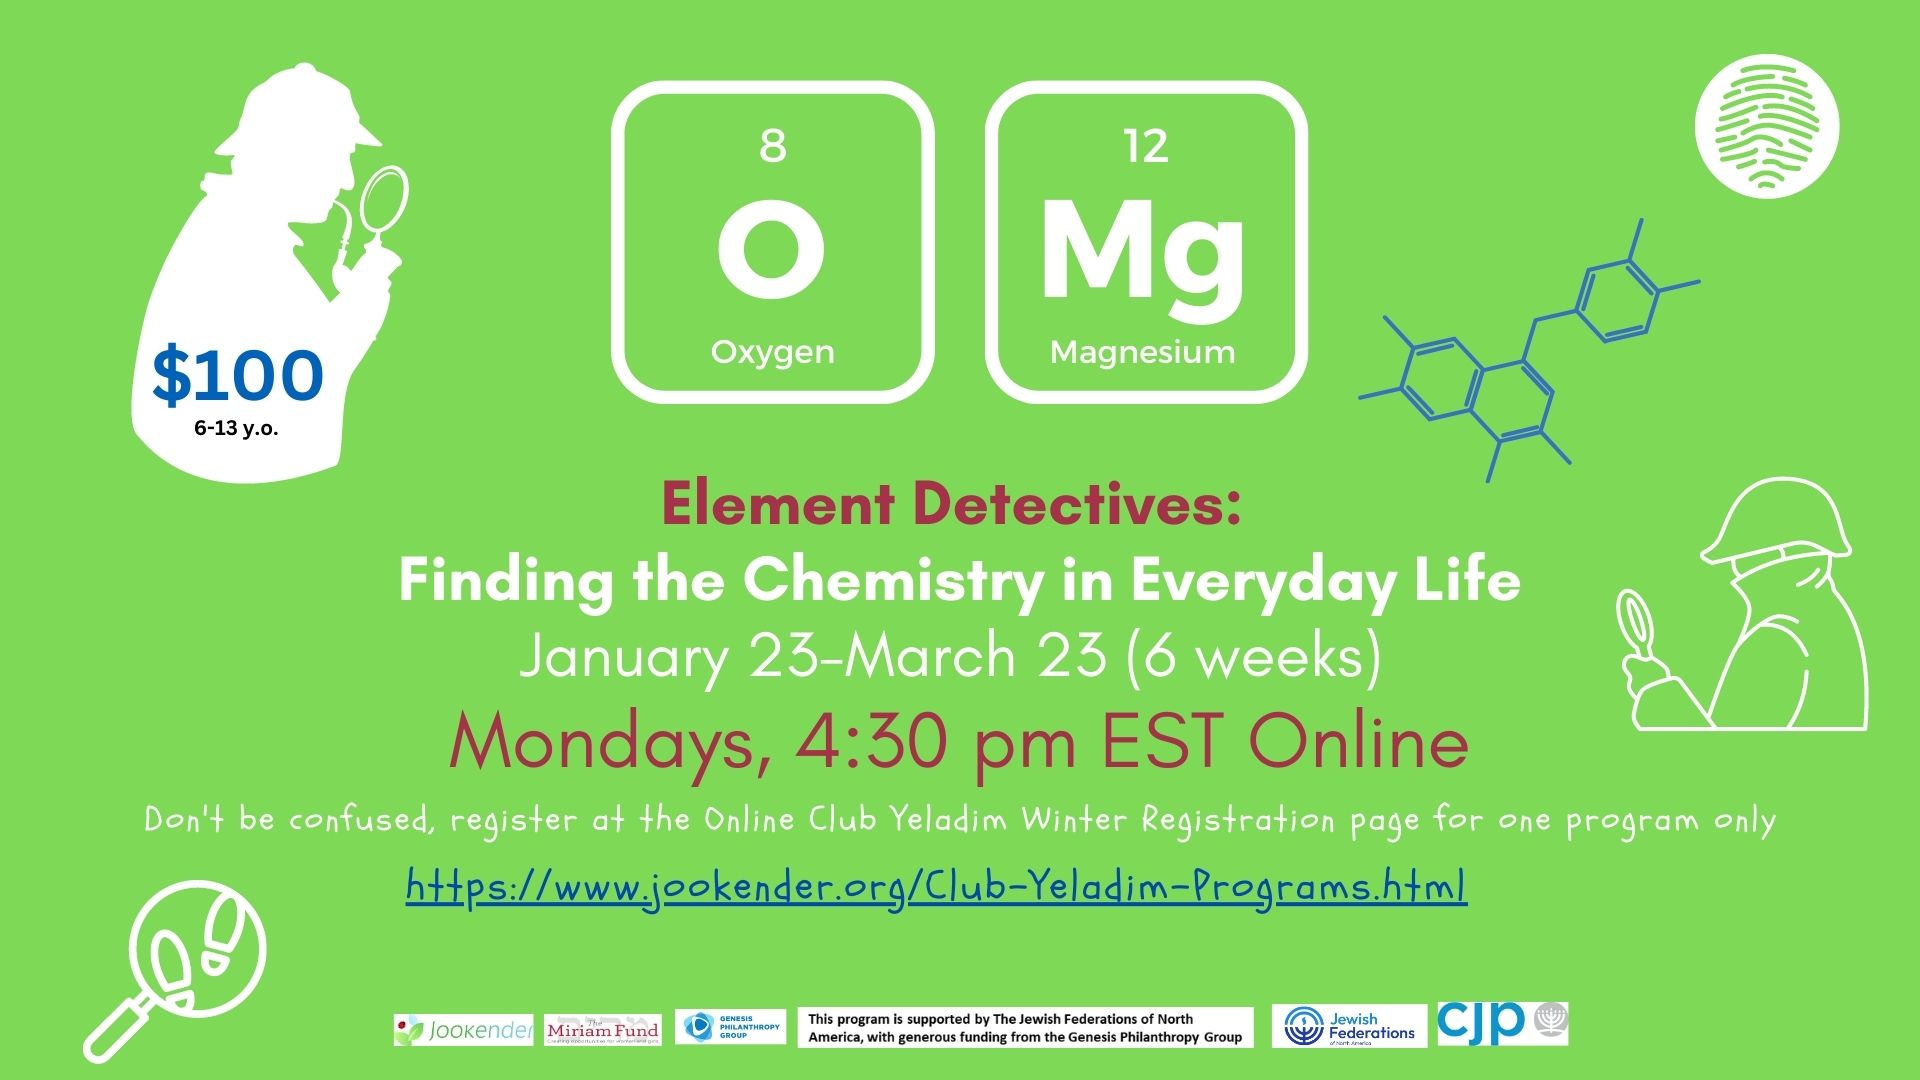 Element Detectives: Finding the Chemistry in Everyday Life (9-13 y.o.)